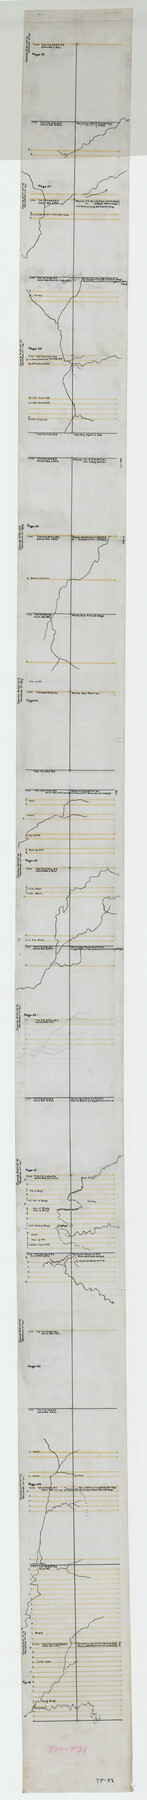 93176, [Strip Map showing T. & P. connecting lines], Twichell Survey Records